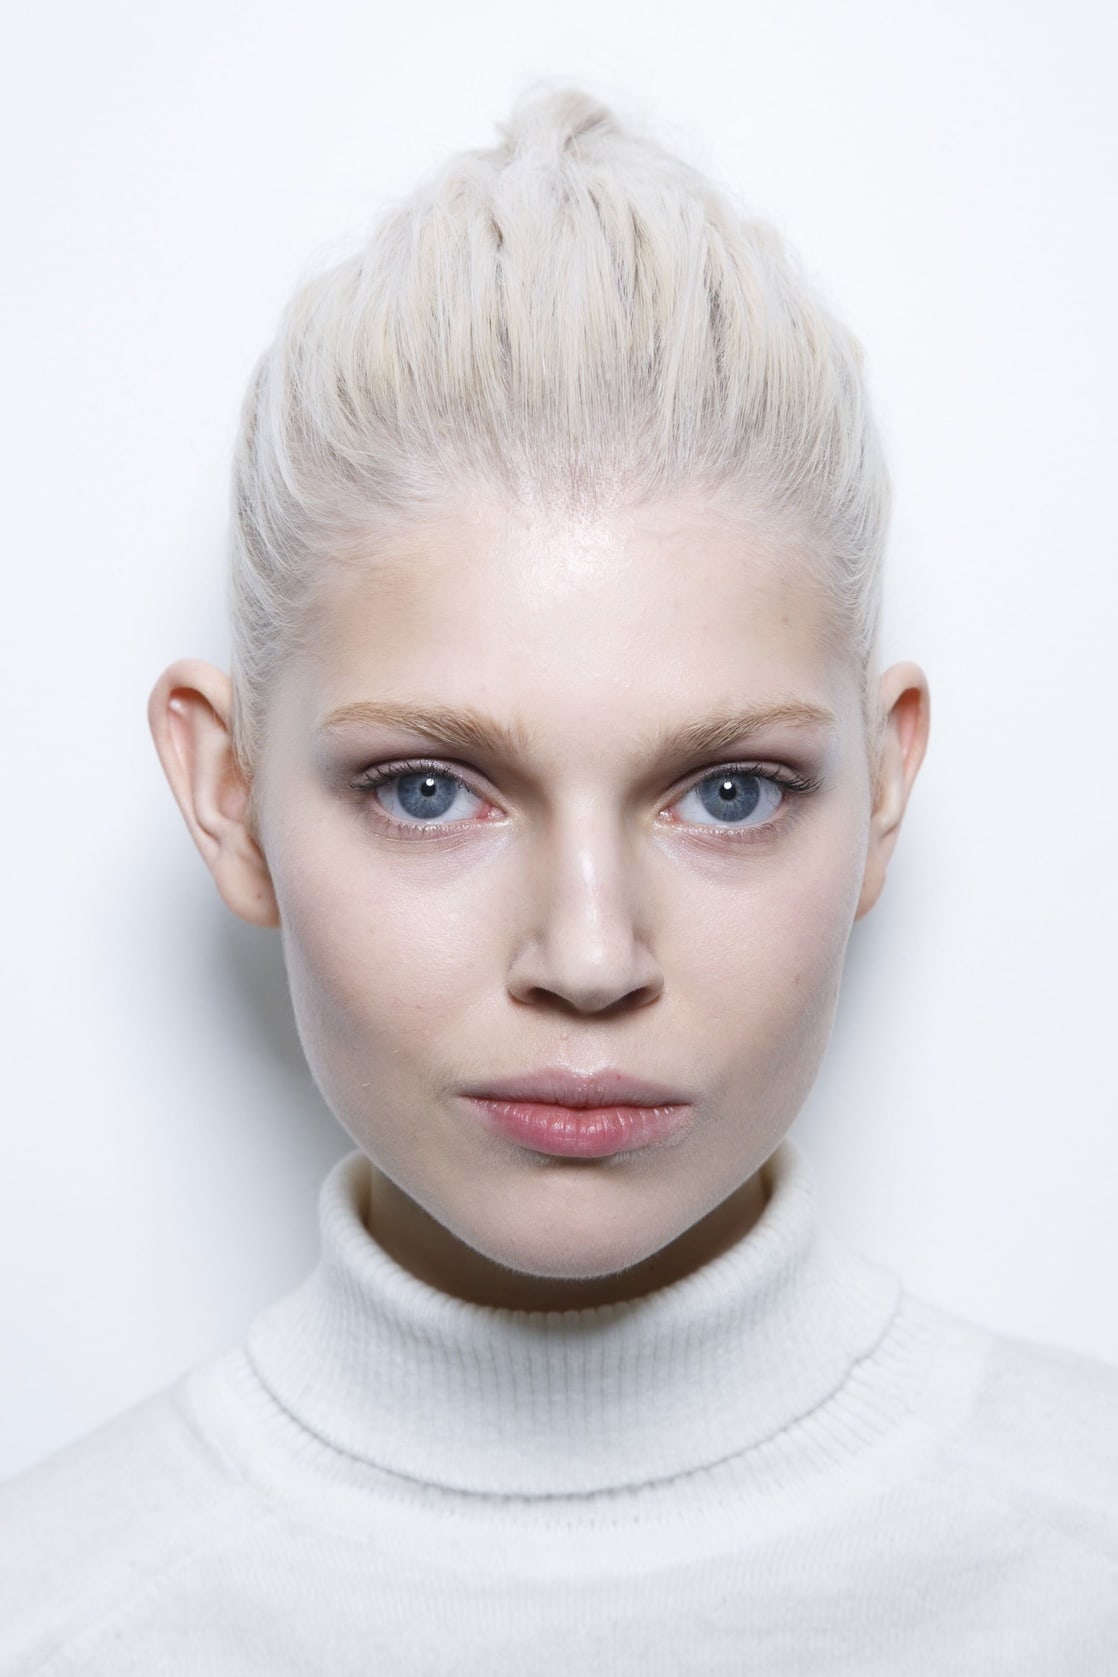 Picture of Ola Rudnicka